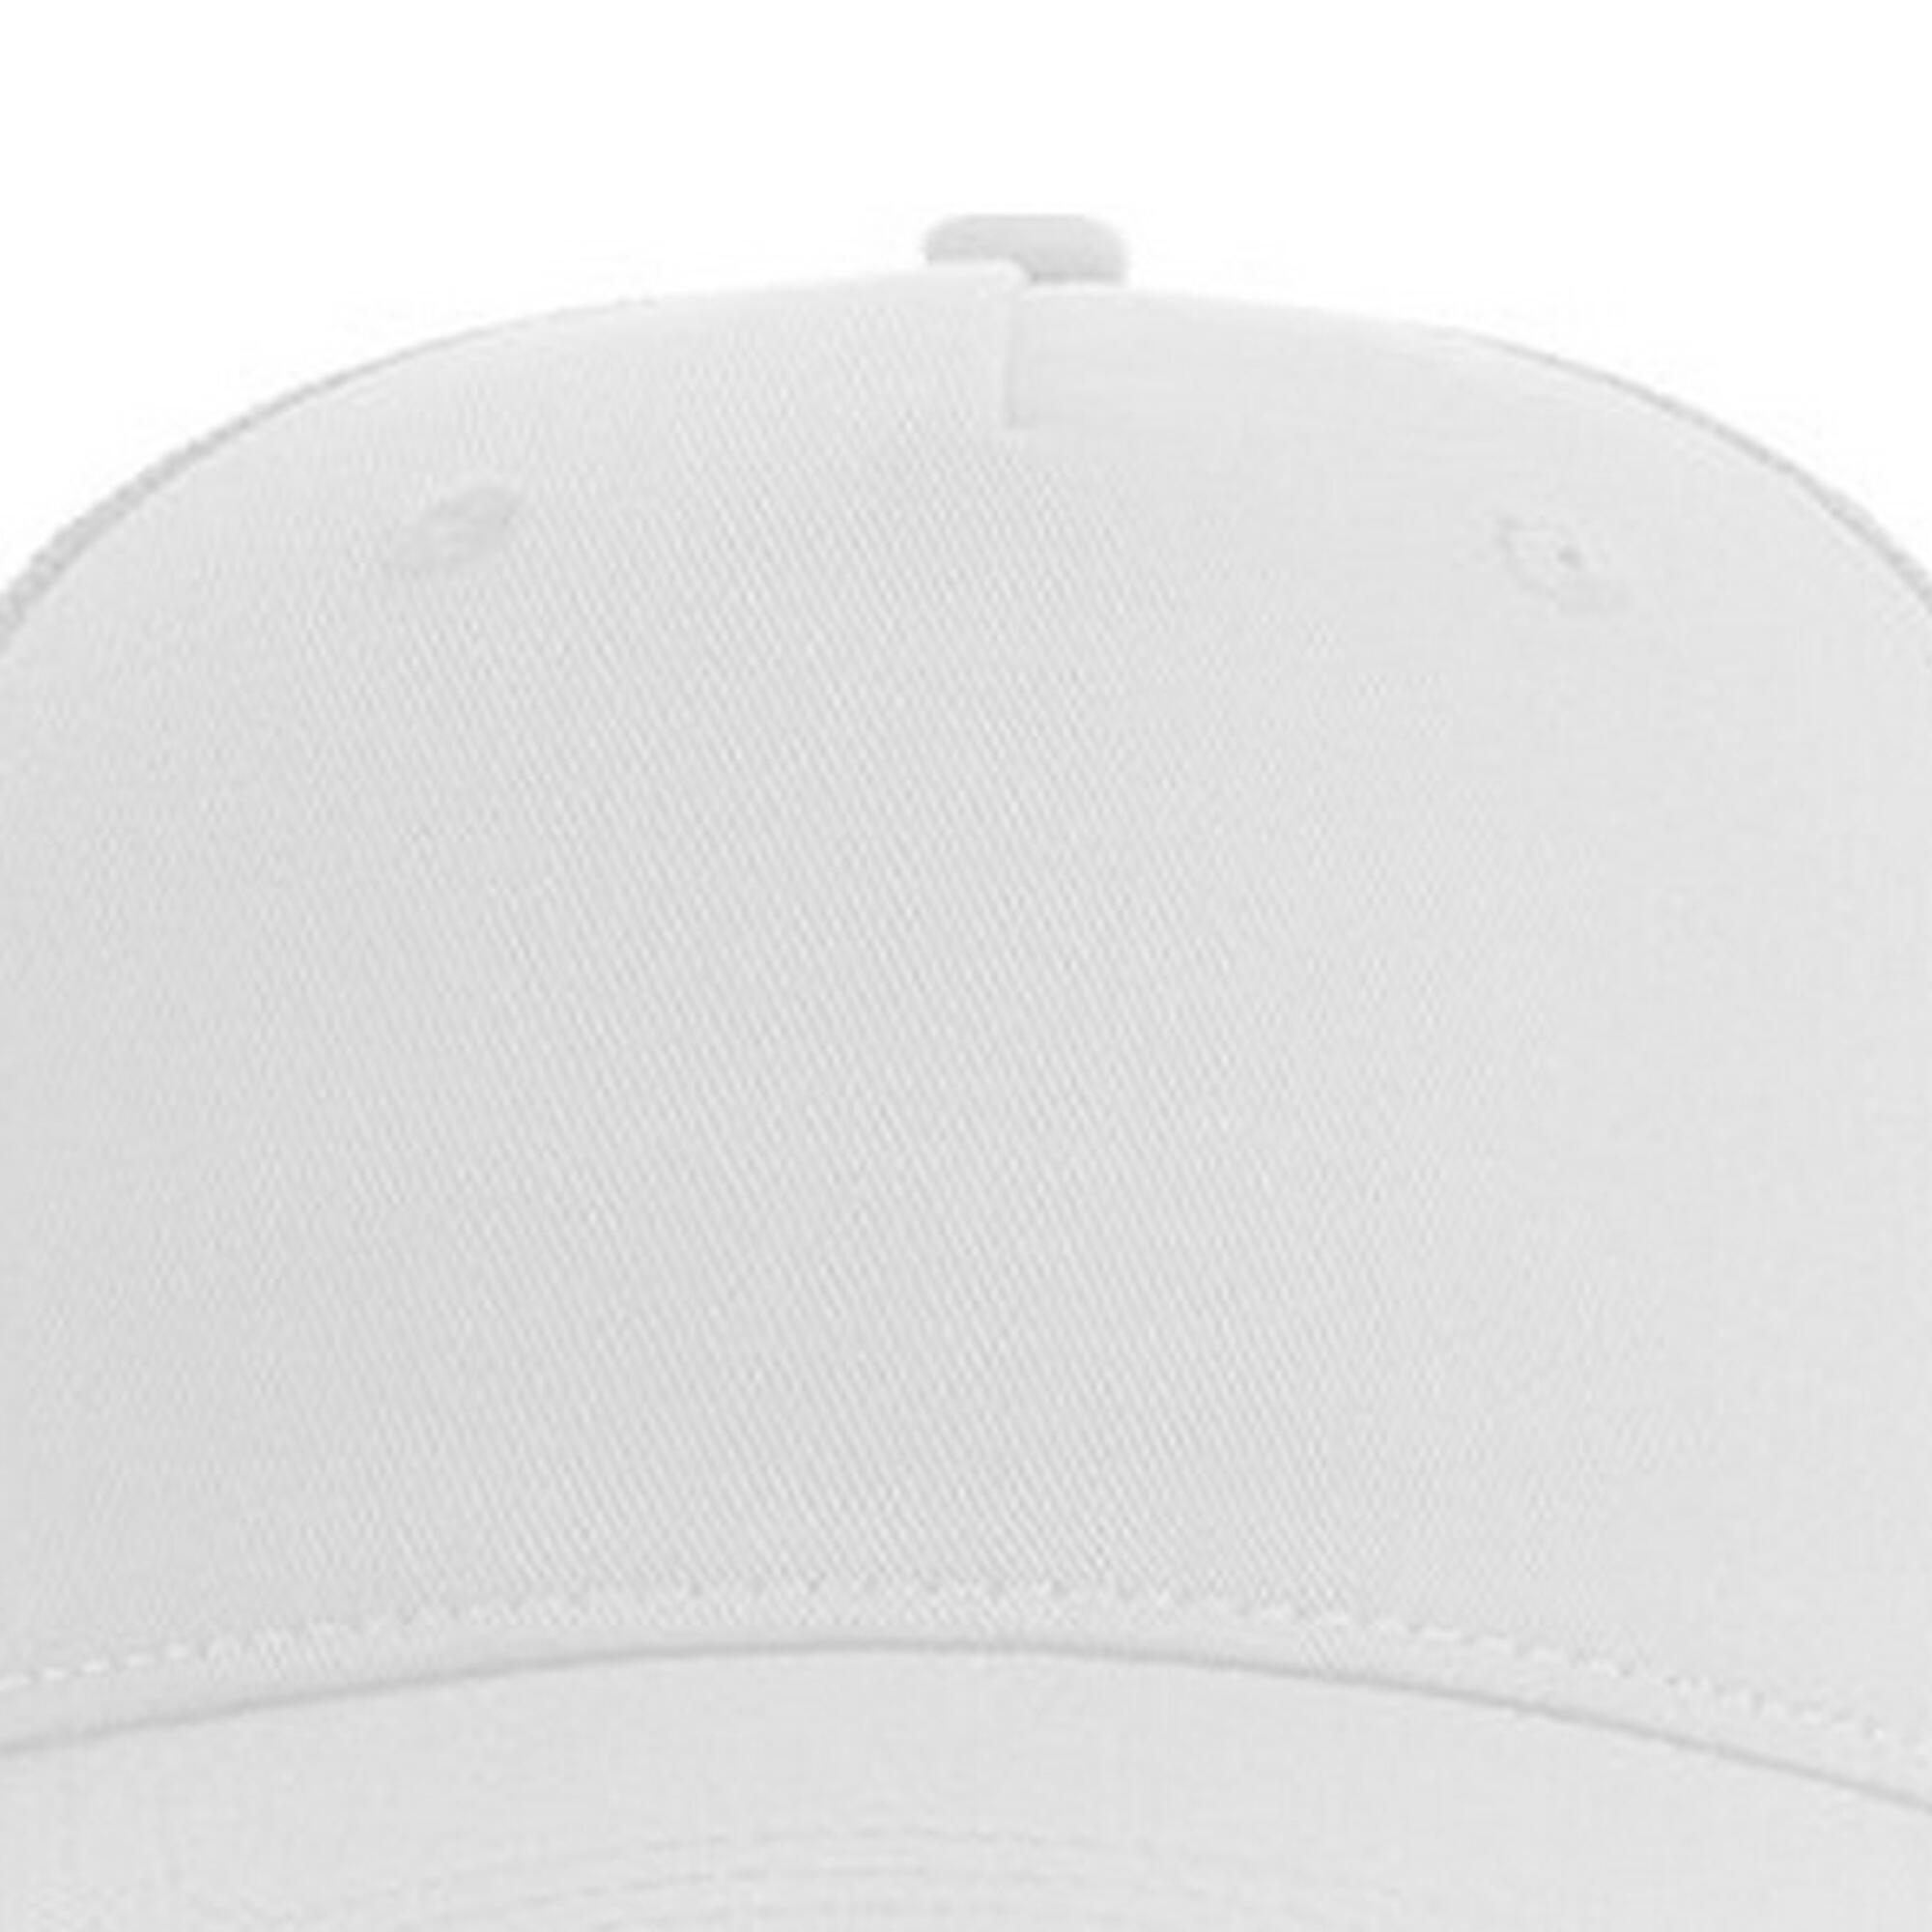 Unisex Adult Zion 6 Panel Recycled Trucker Cap (White) 3/3